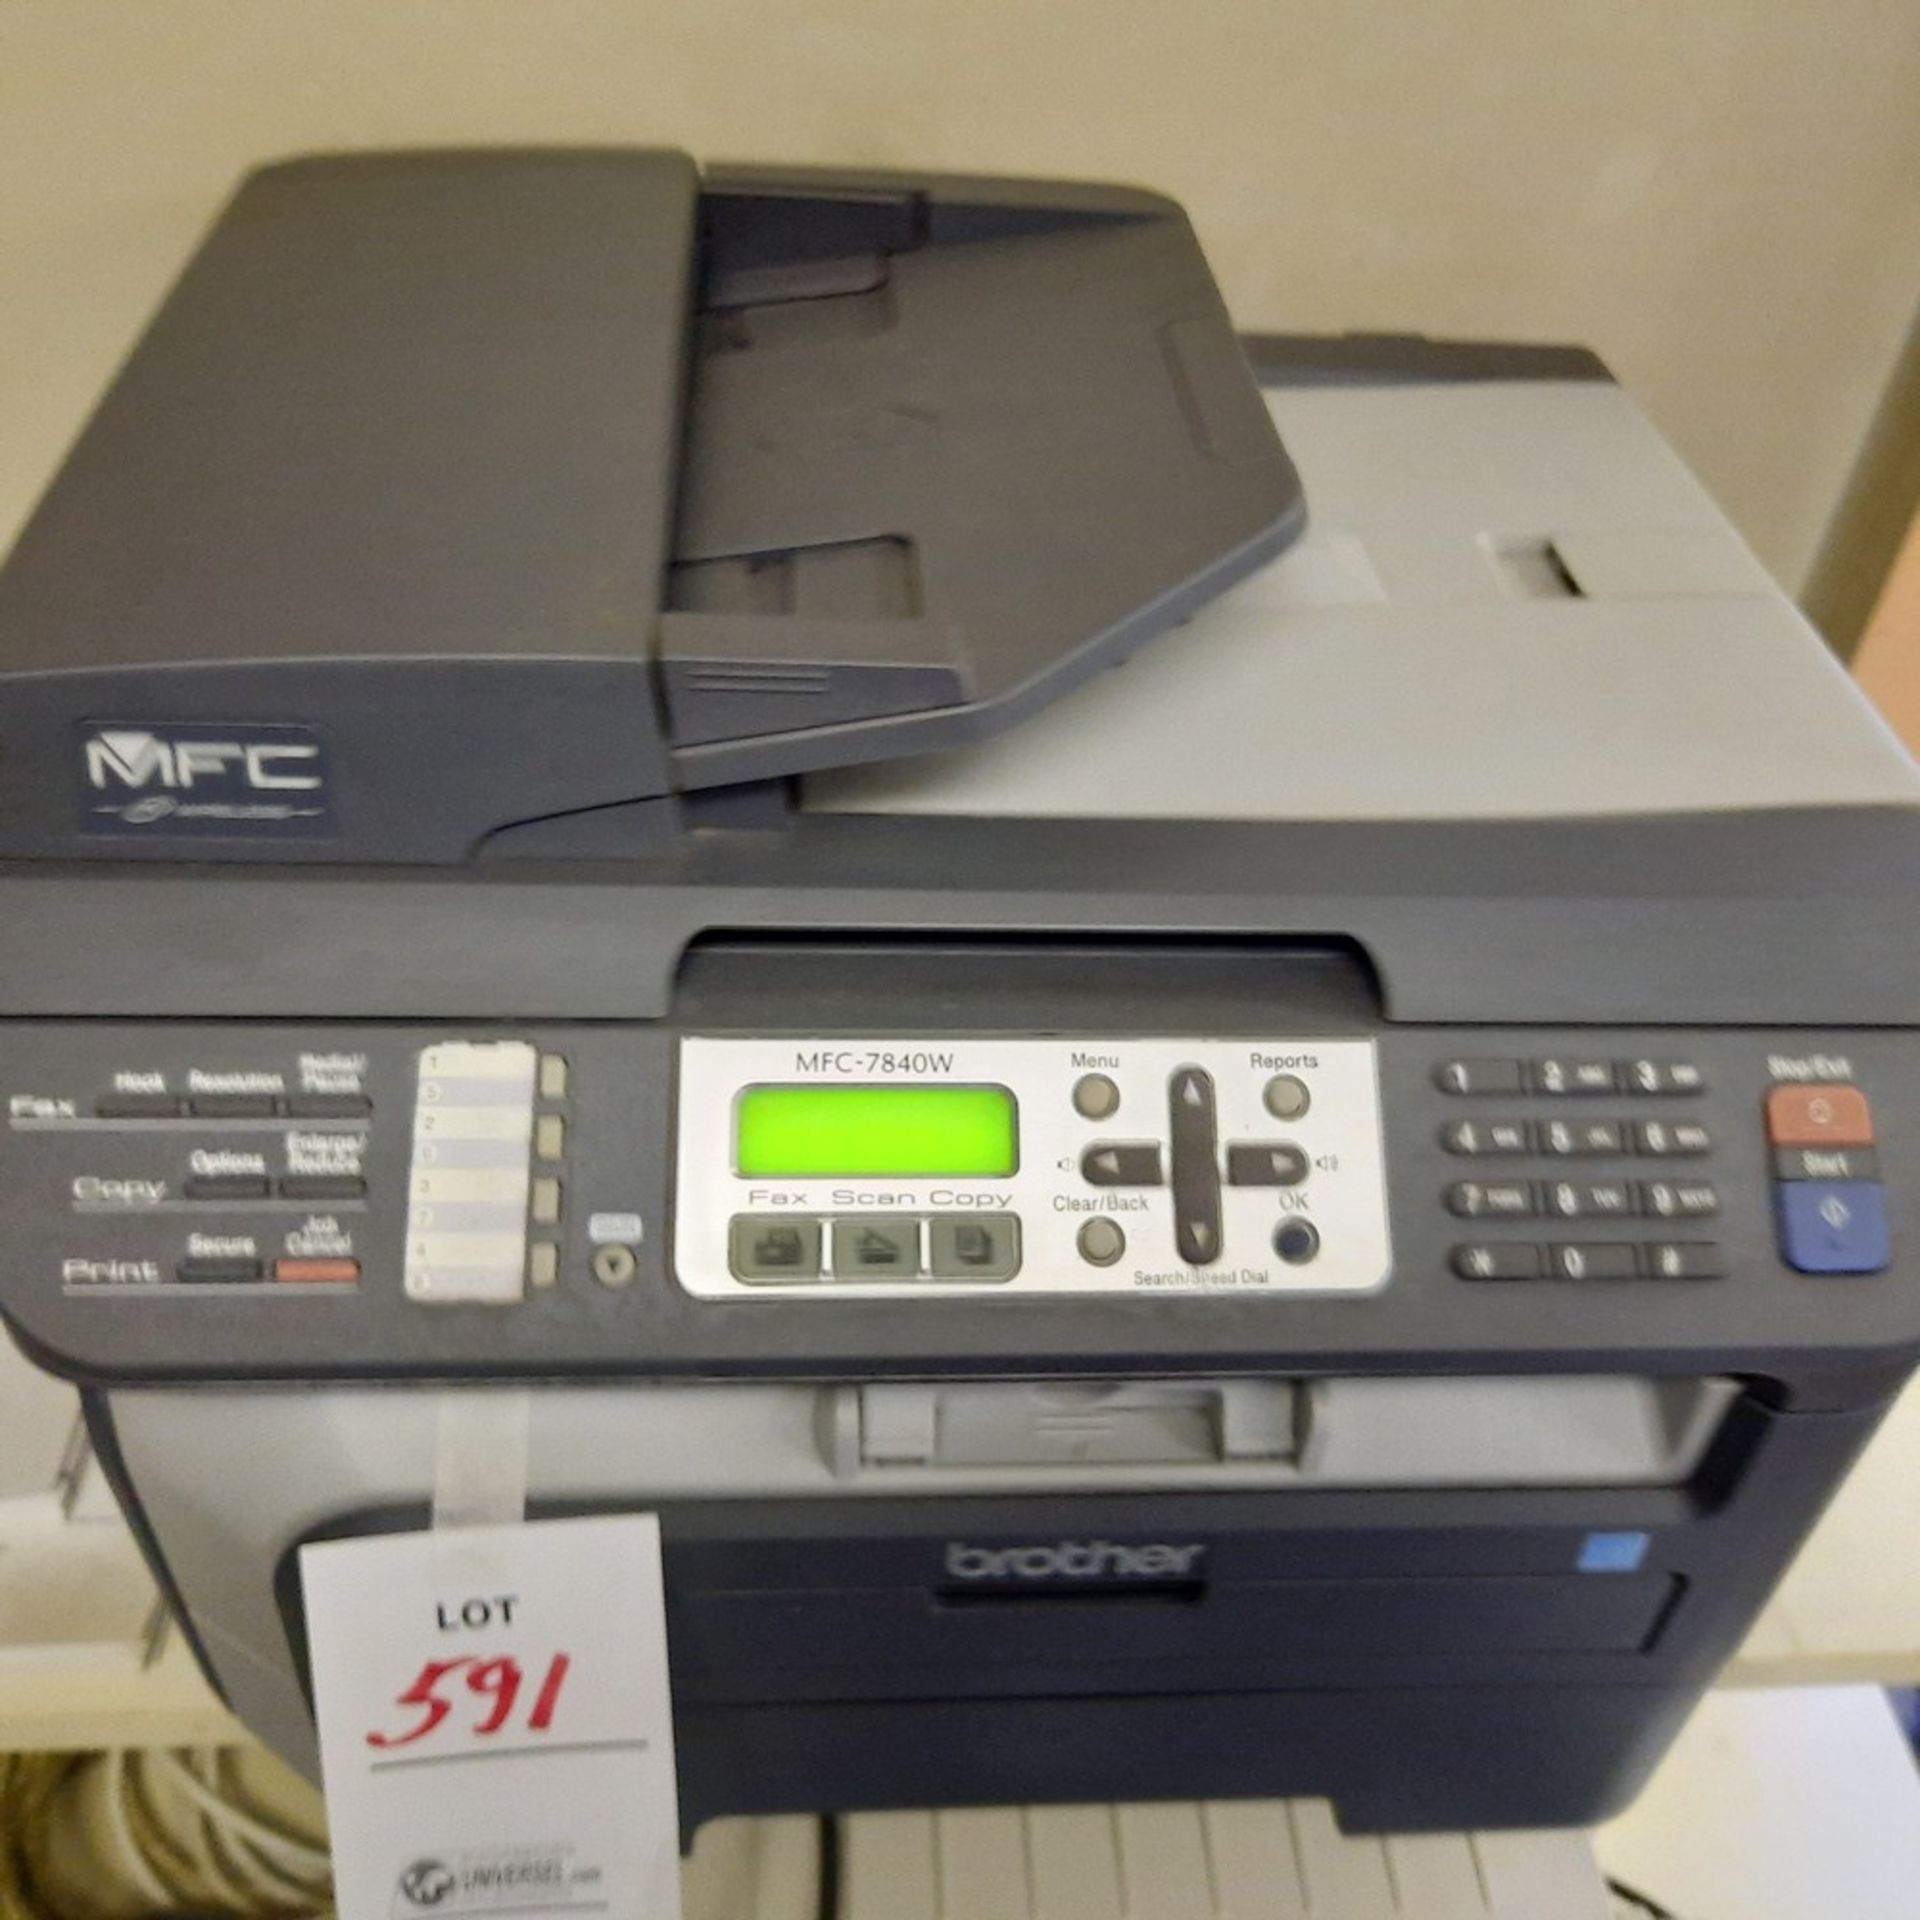 BROTHER Multi-Function Printer/Scanner/Fax - Image 3 of 3